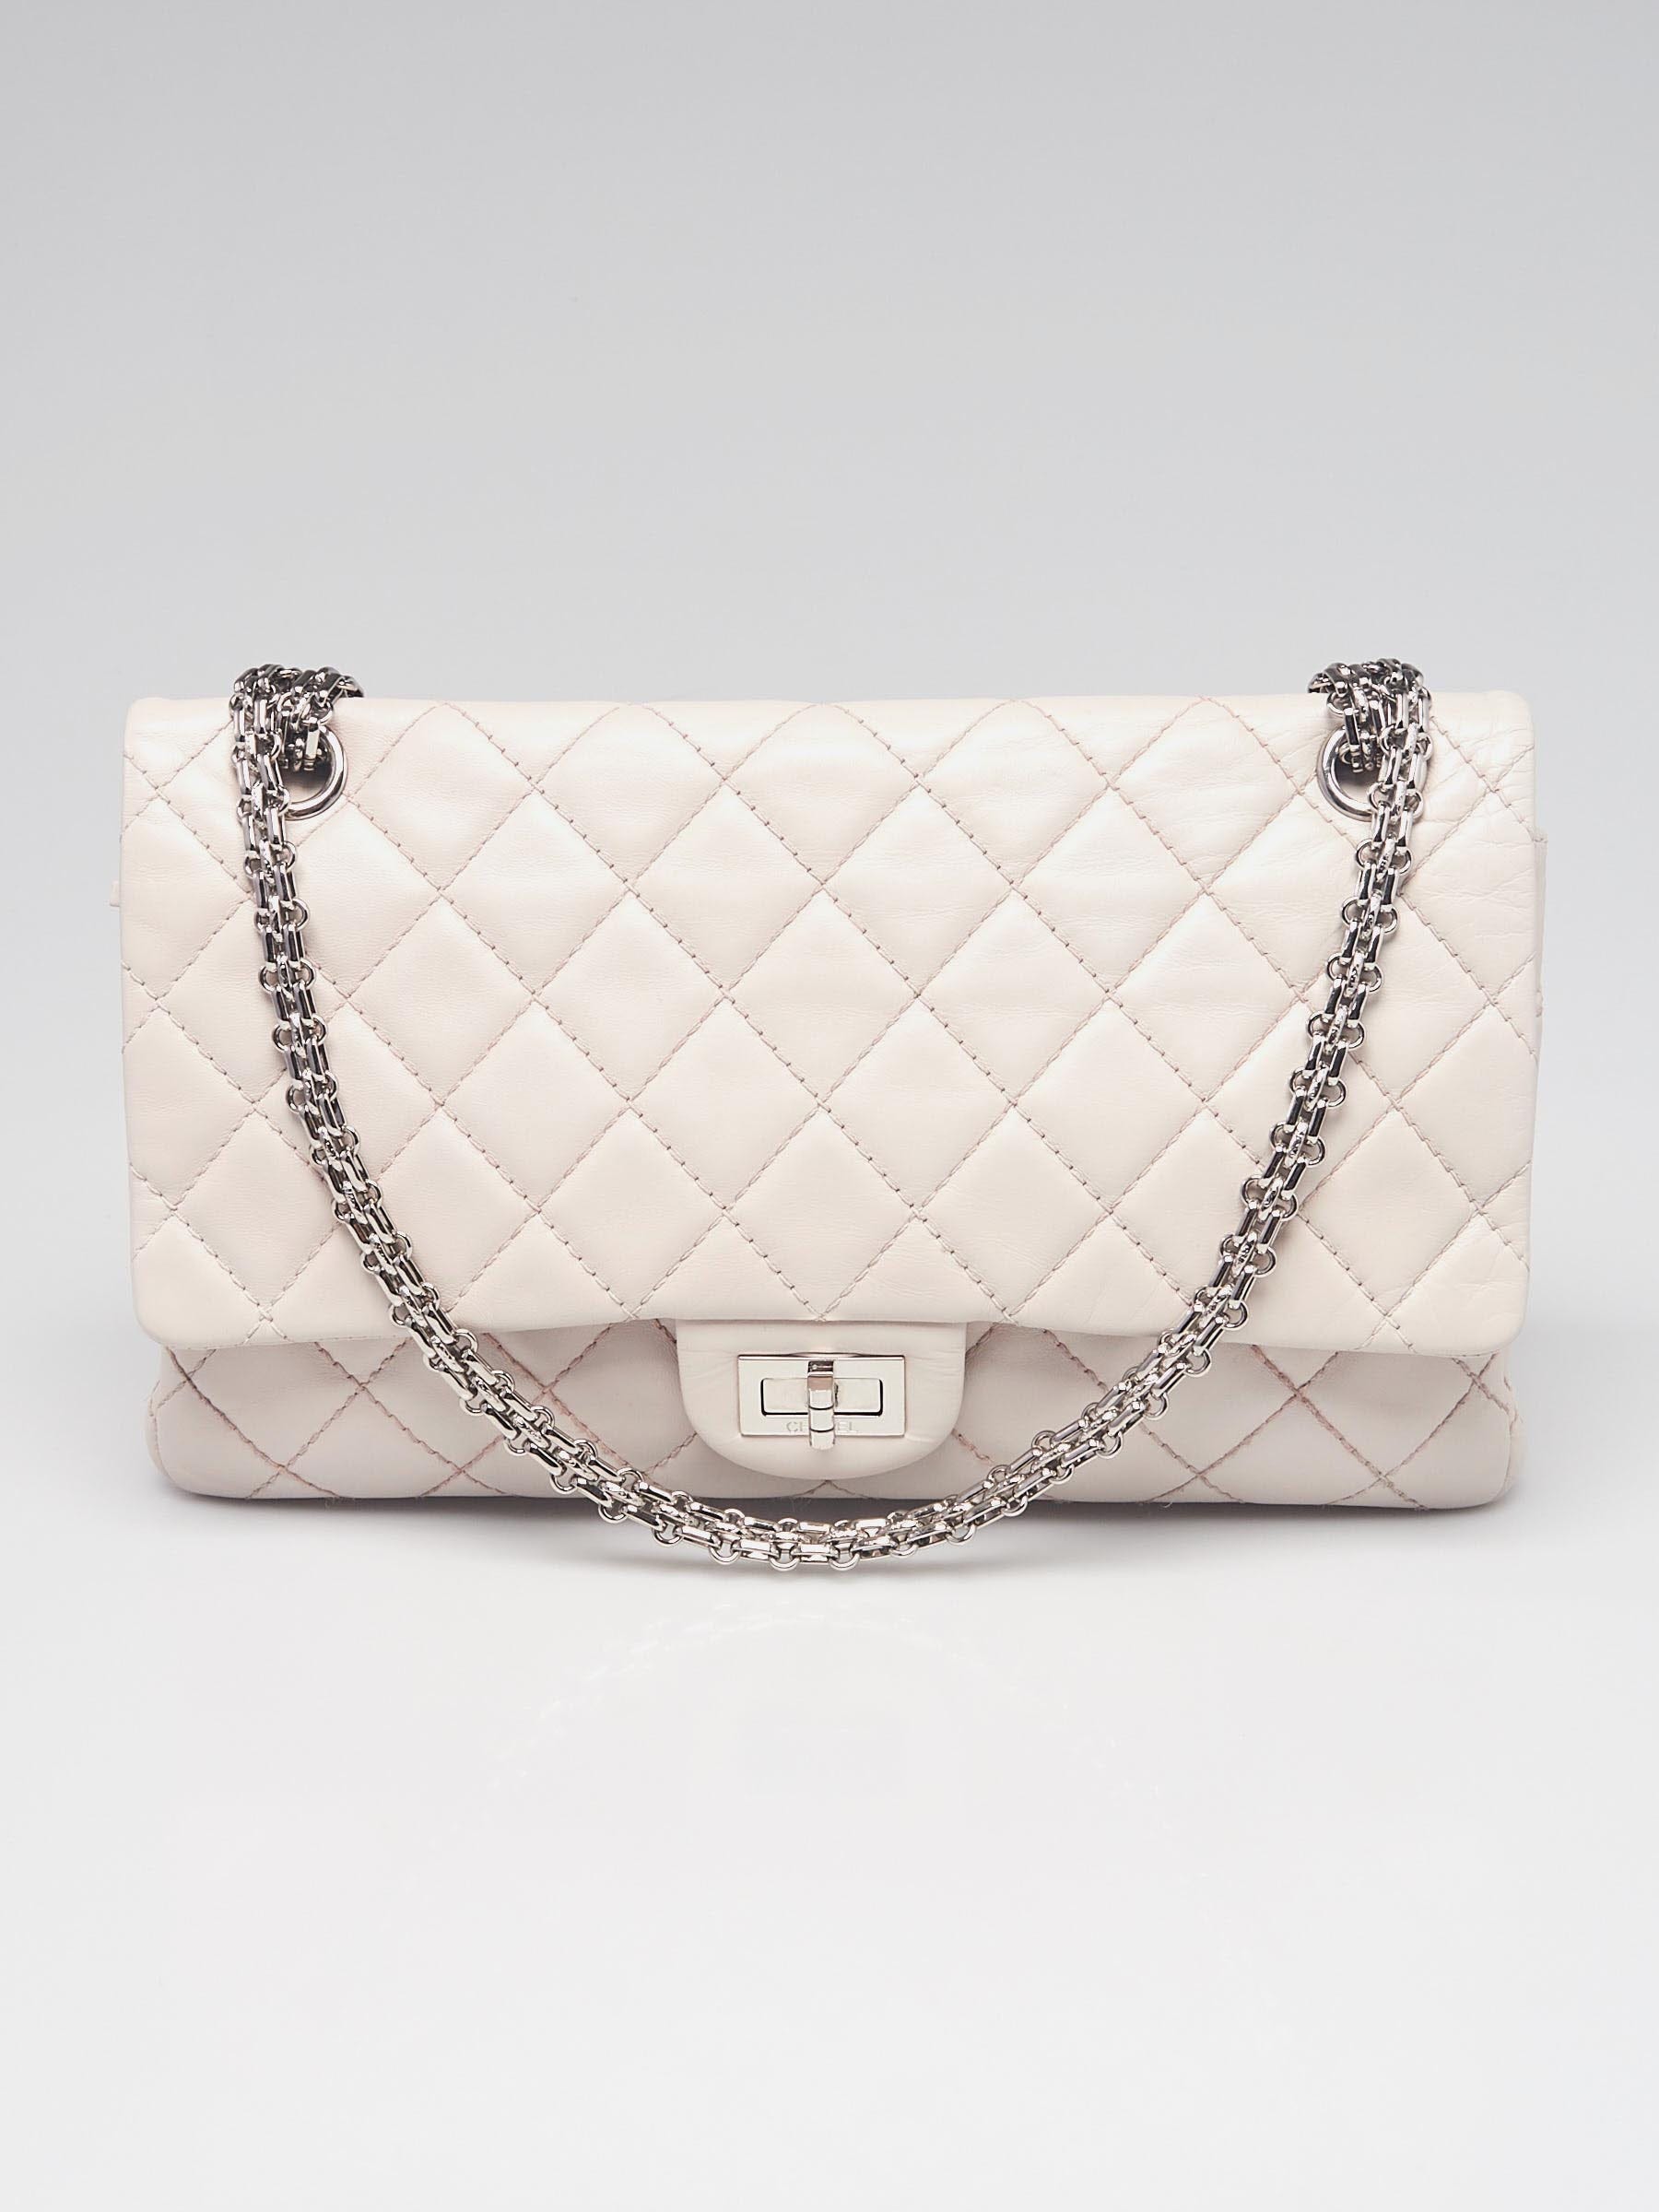 Chanel Beige Quilted Lambskin Leather Chanel 19 Large Flap Bag